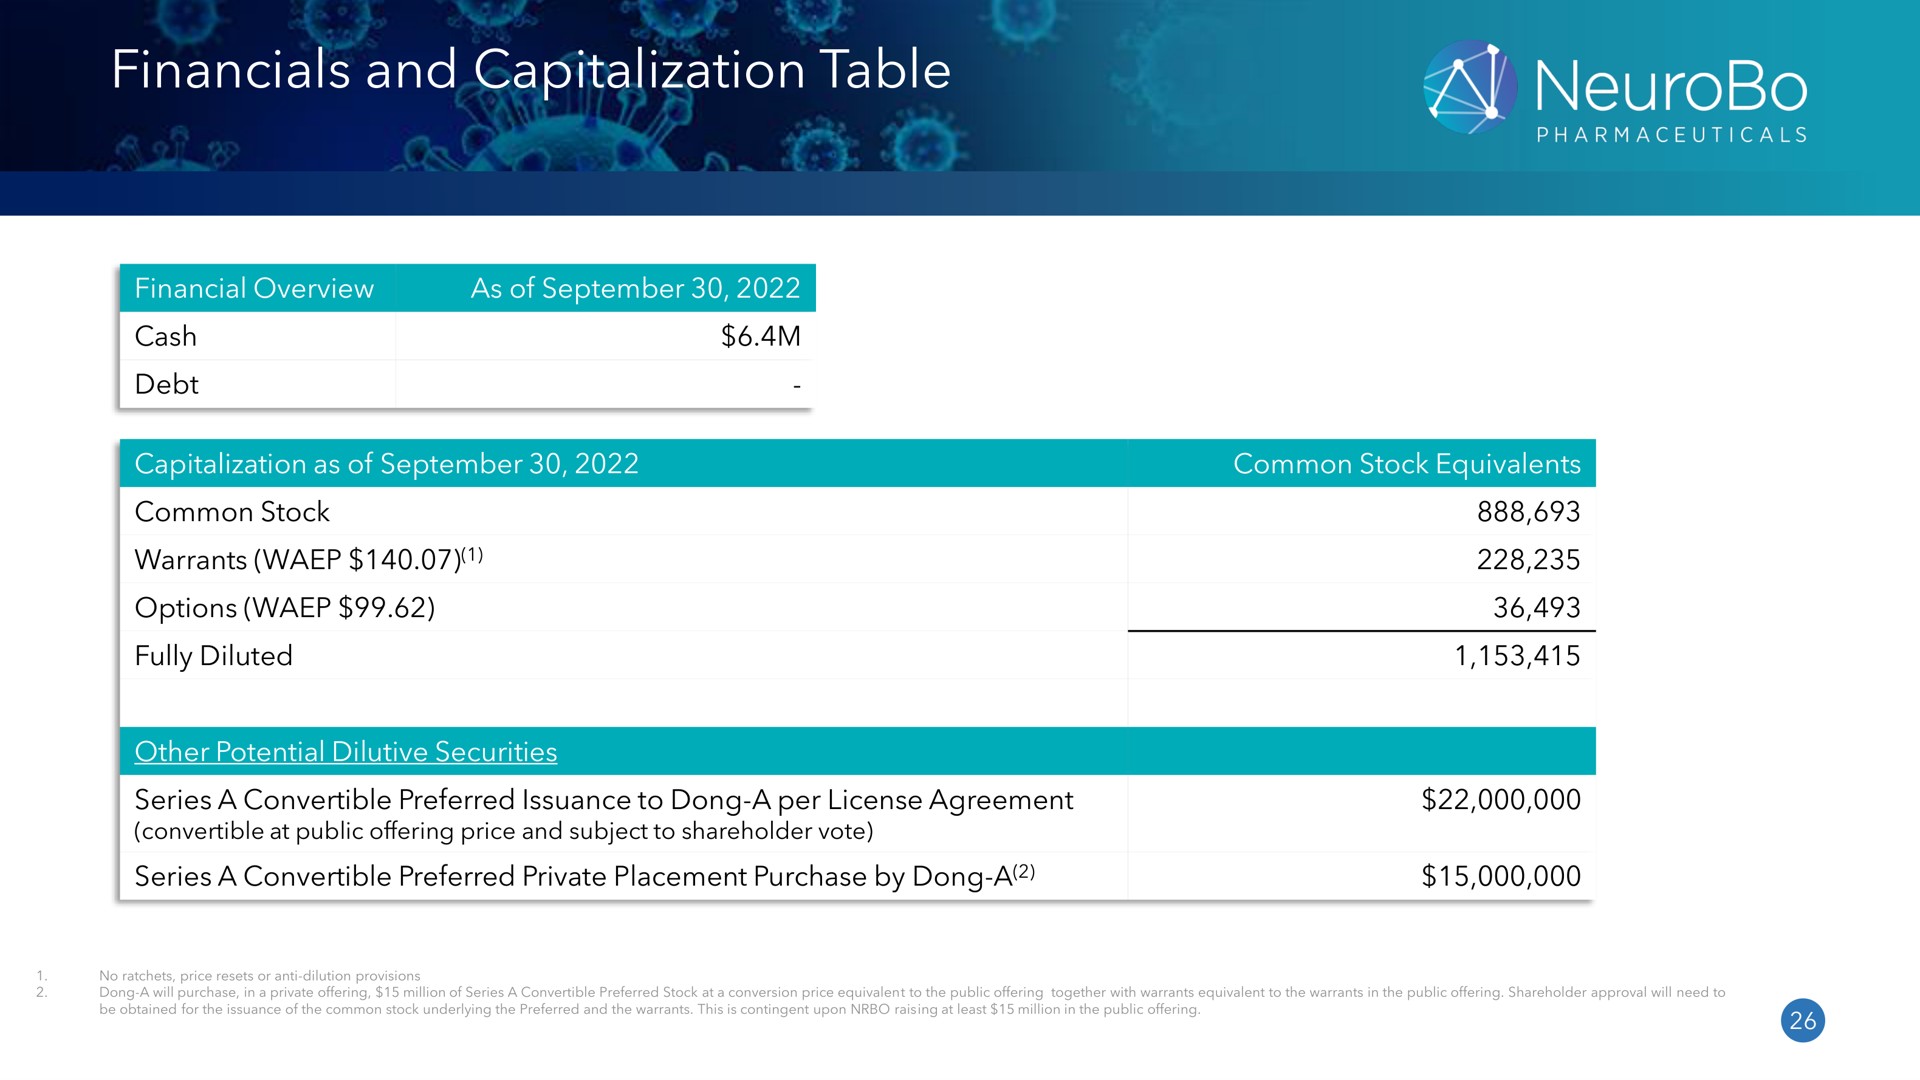 and capitalization table | NeuroBo Pharmaceuticals